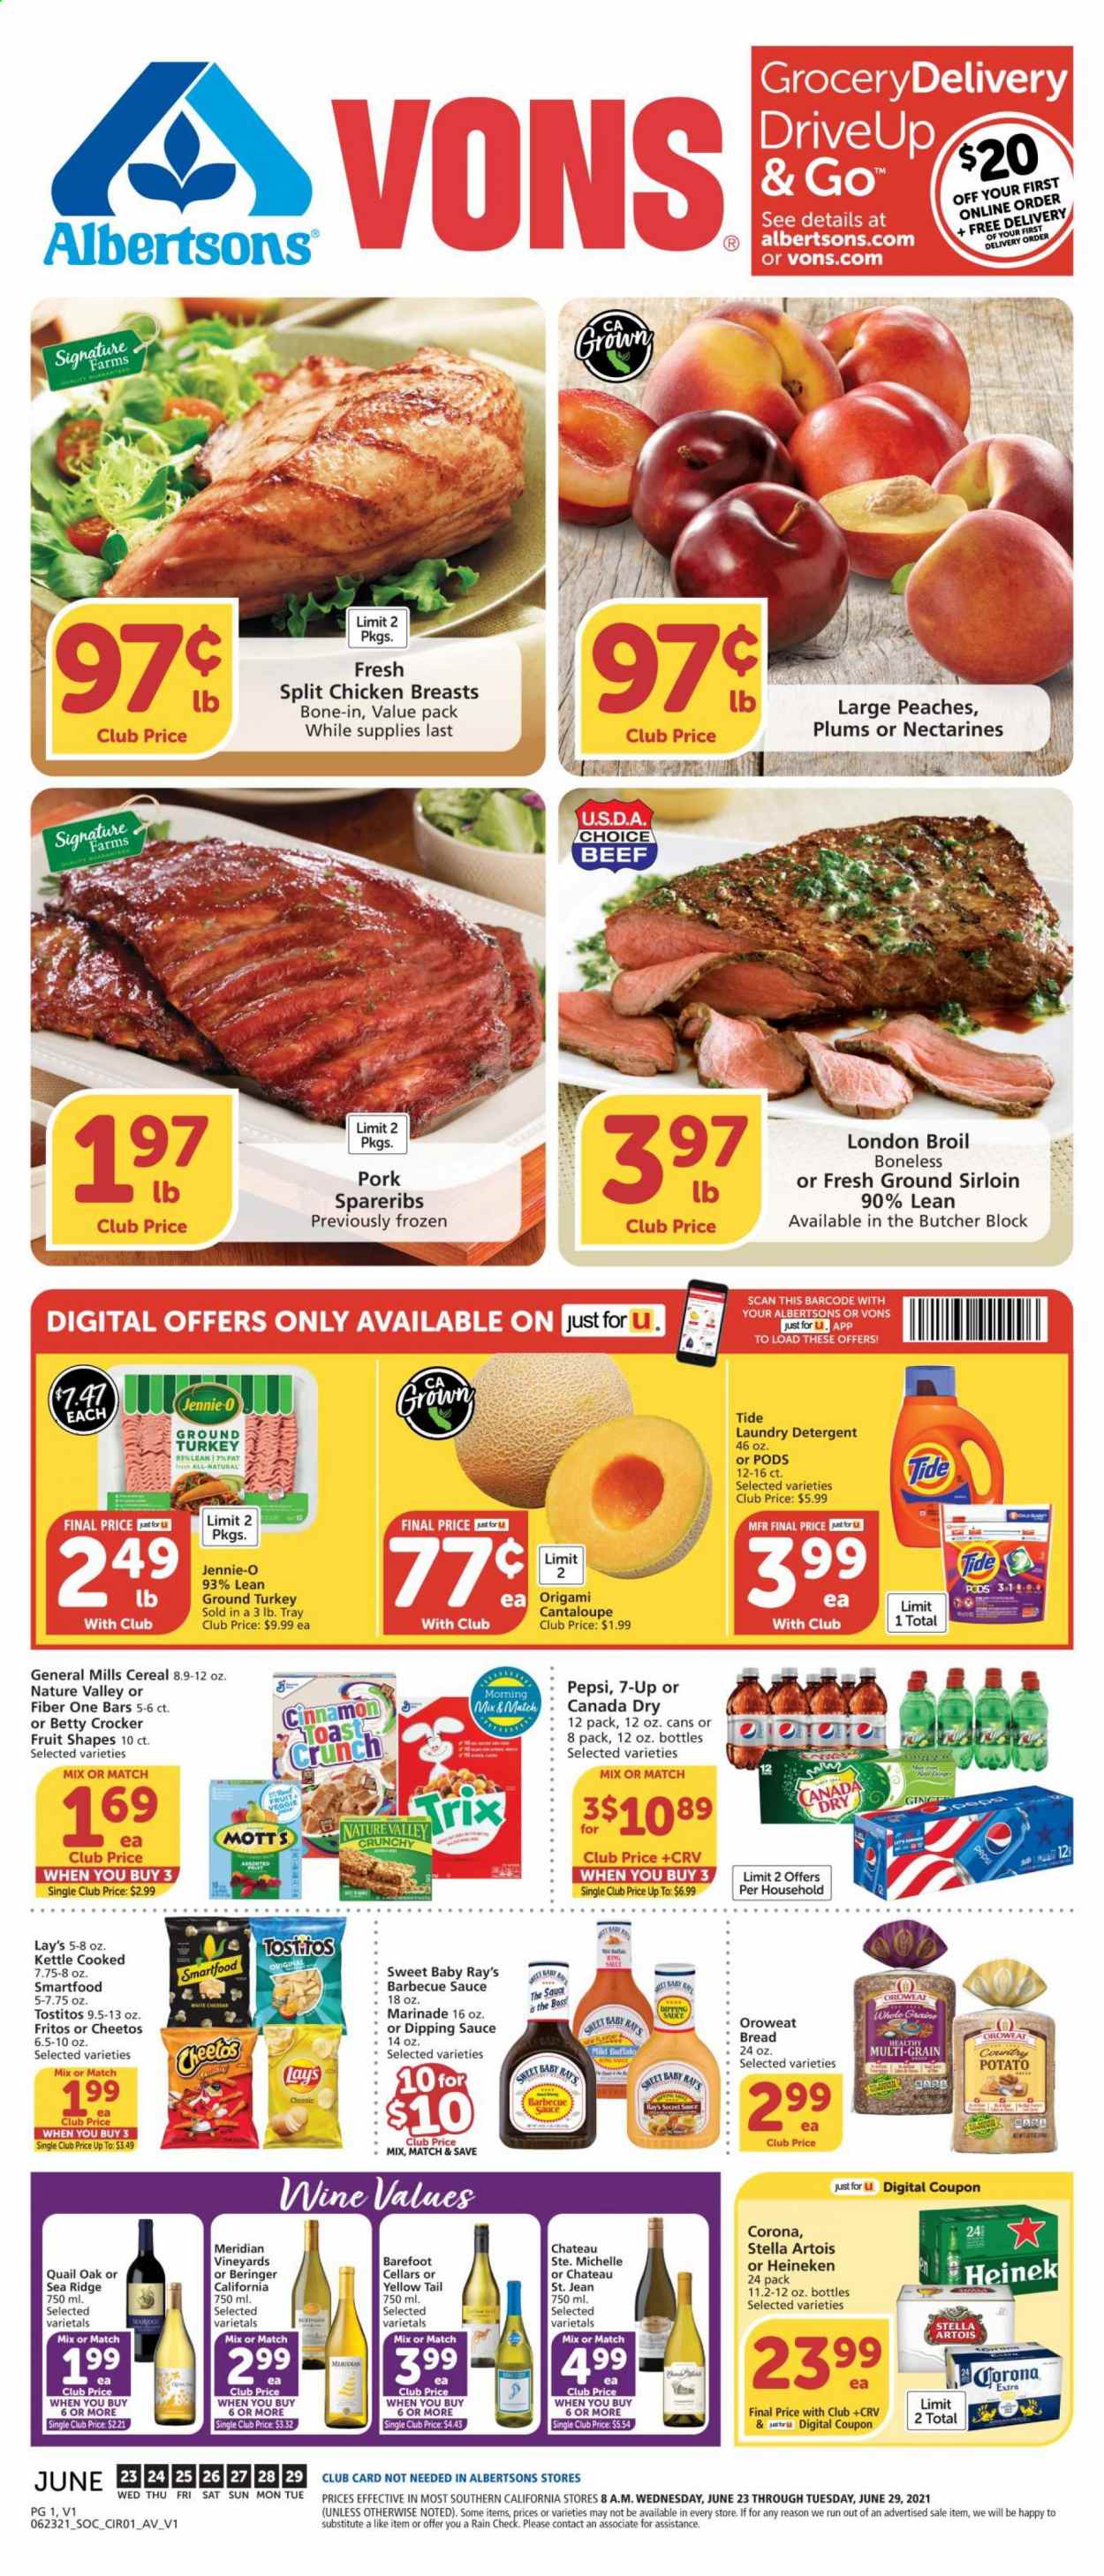 thumbnail - Albertsons Flyer - 06/23/2021 - 06/29/2021 - Sales products - Stella Artois, plums, bread, cantaloupe, ginger, Mott's, Fritos, Cheetos, Lay’s, Smartfood, Tostitos, cereals, Trix, Nature Valley, Fiber One, cinnamon, BBQ sauce, marinade, wing sauce, Canada Dry, Pepsi, 7UP, Quail Oak, beer, Corona Extra, Heineken, ground turkey, chicken breasts, pork spare ribs, detergent, Tide, laundry detergent, tray, nectarines, peaches. Page 1.